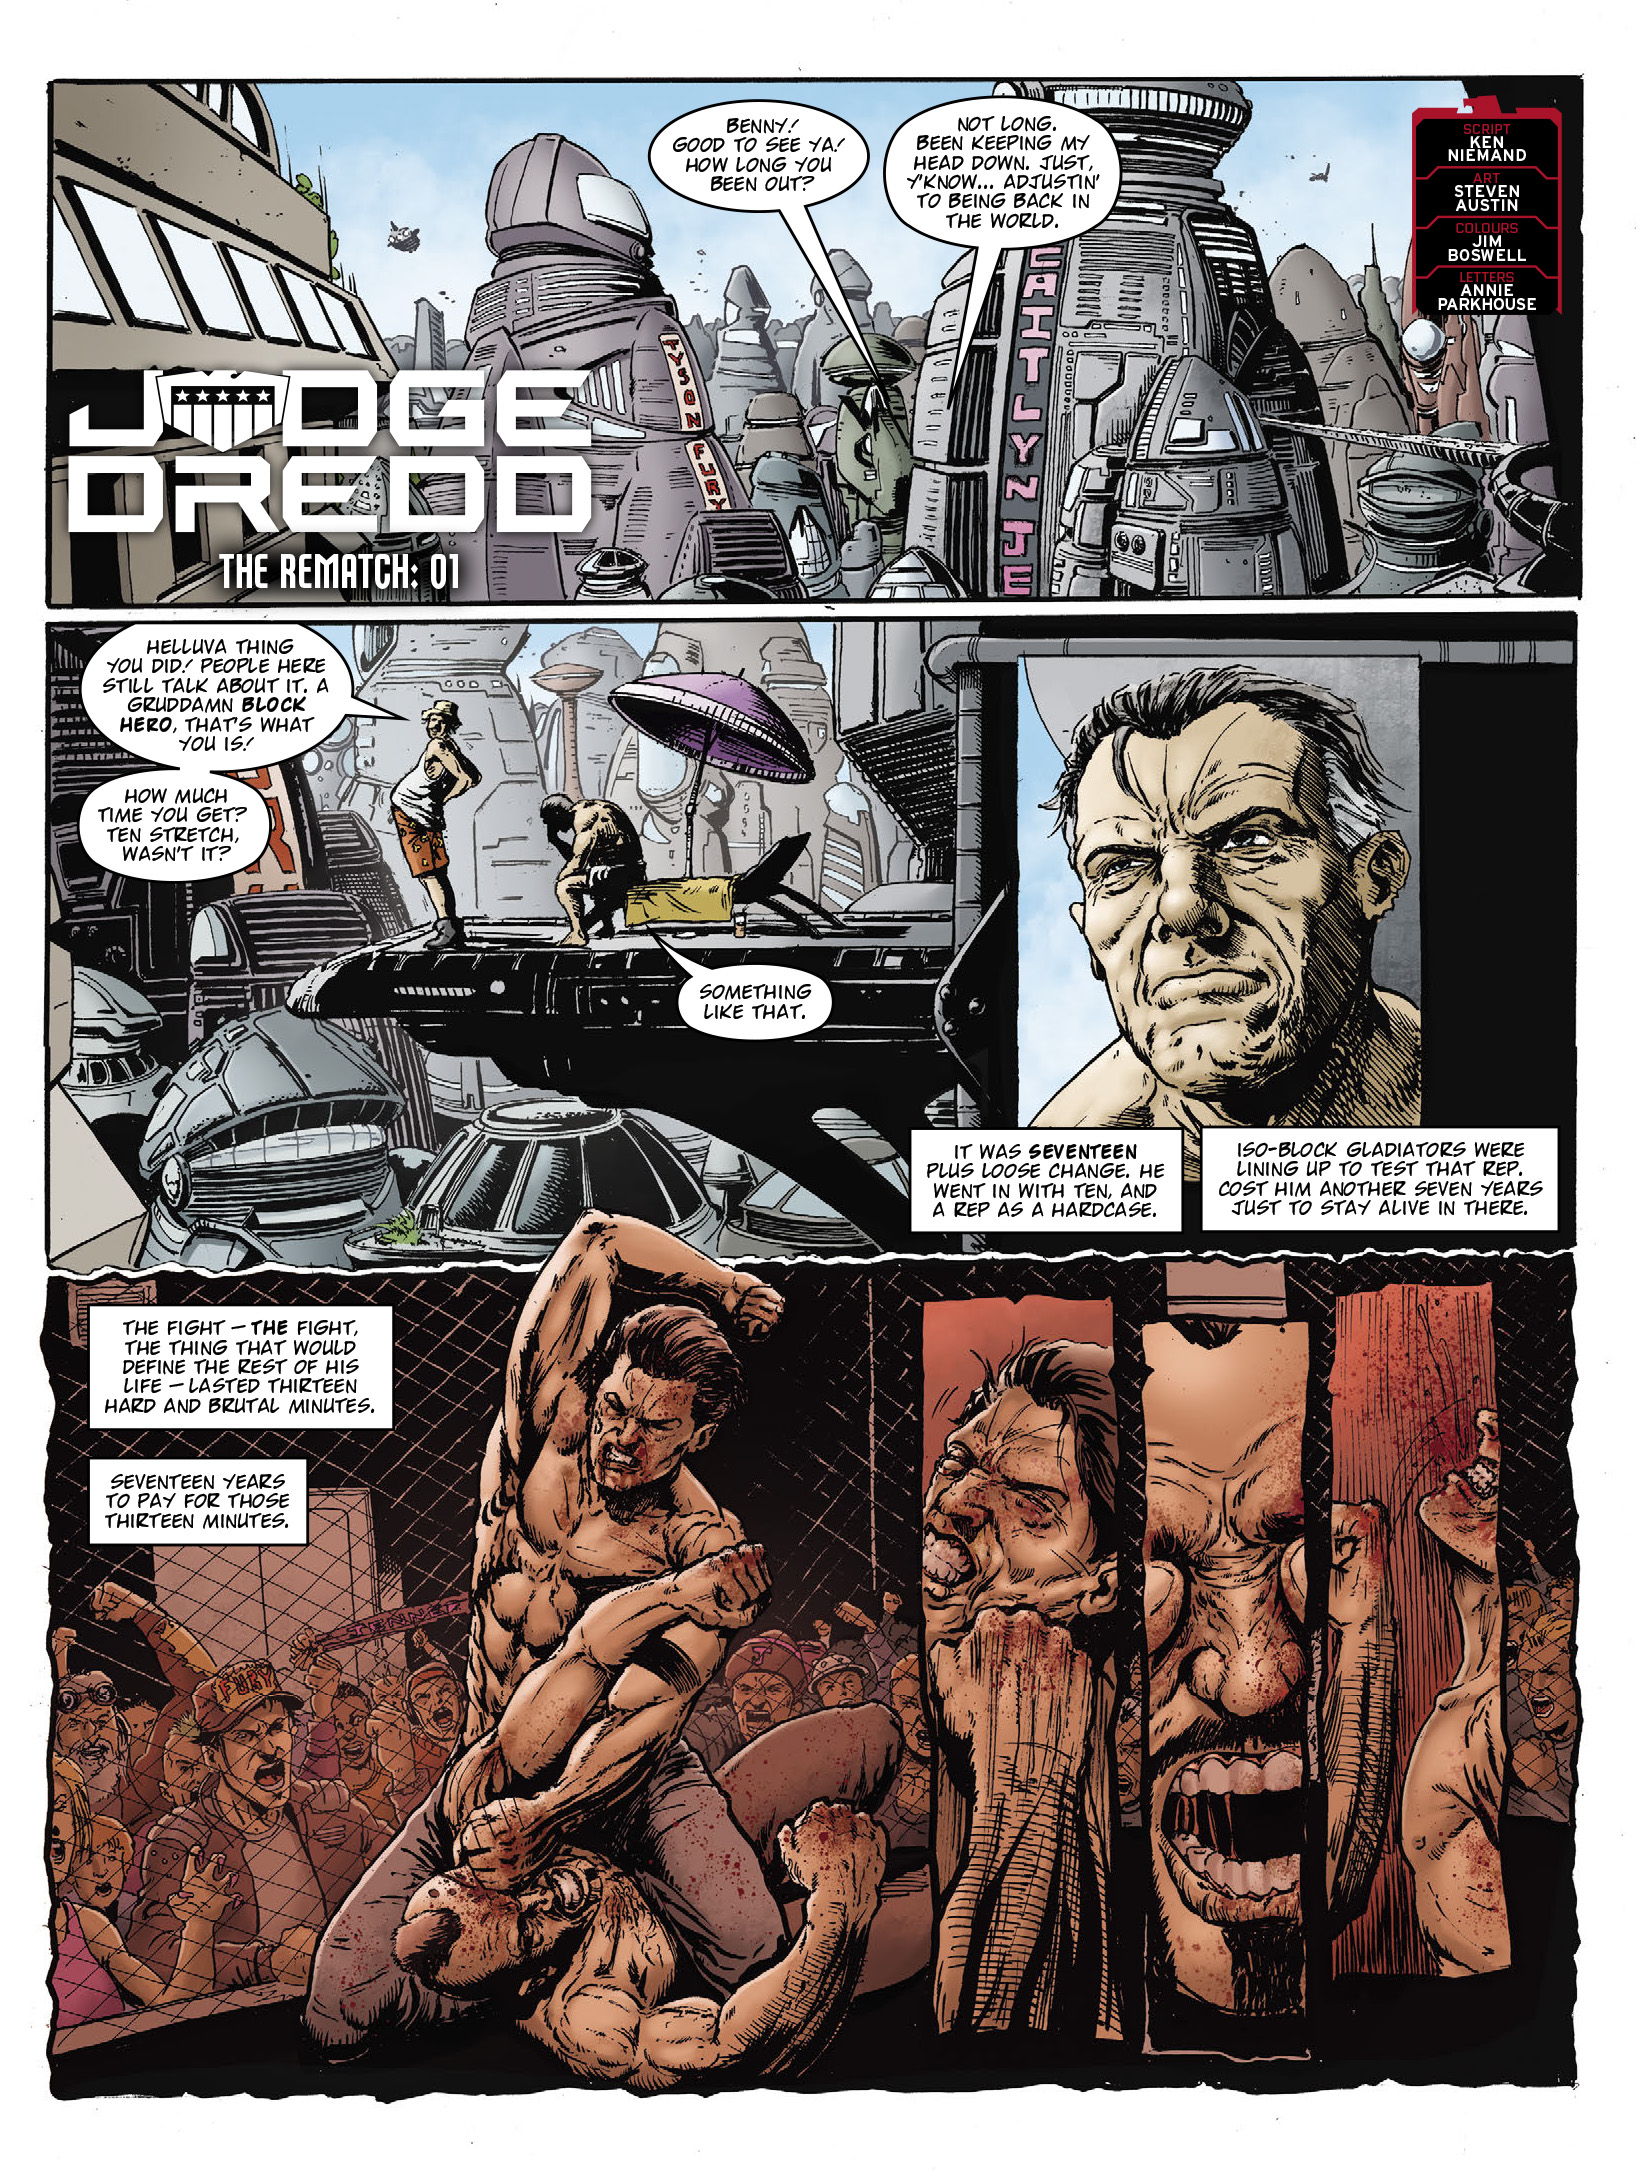 2000 AD: Chapter 2310 - Page 3